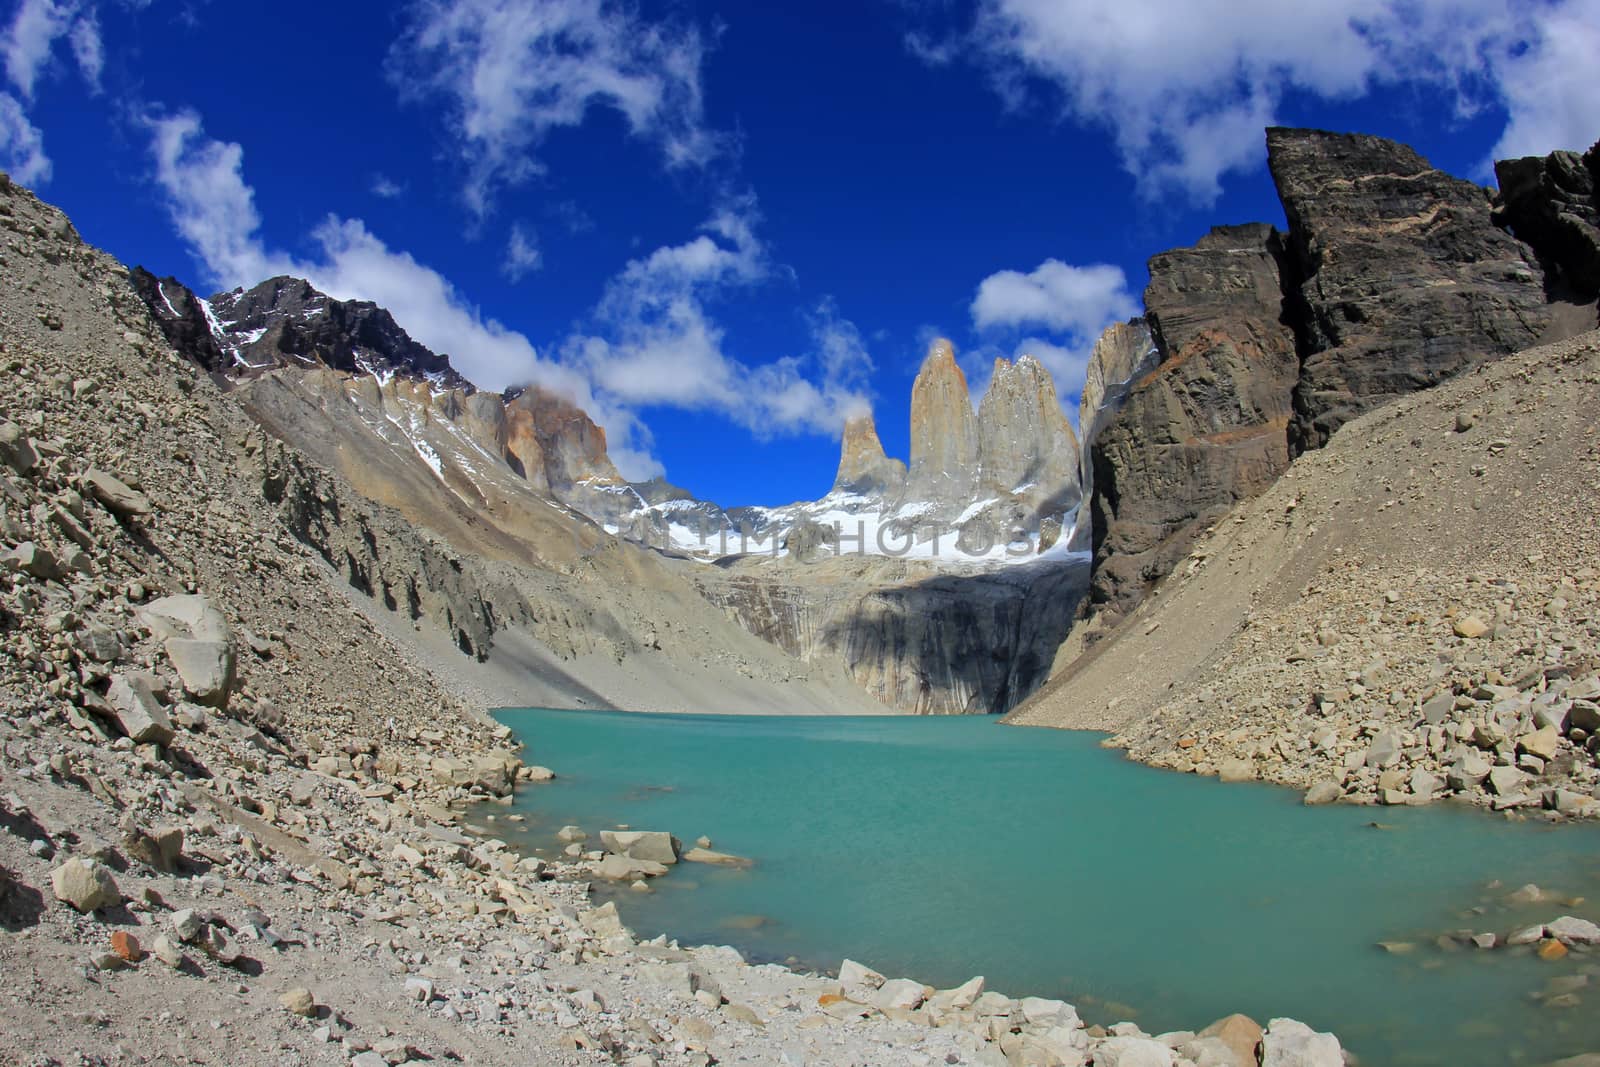 The three towers at Torres del Paine National Park, Patagonia, Chile, view from Mirador de Las Torres